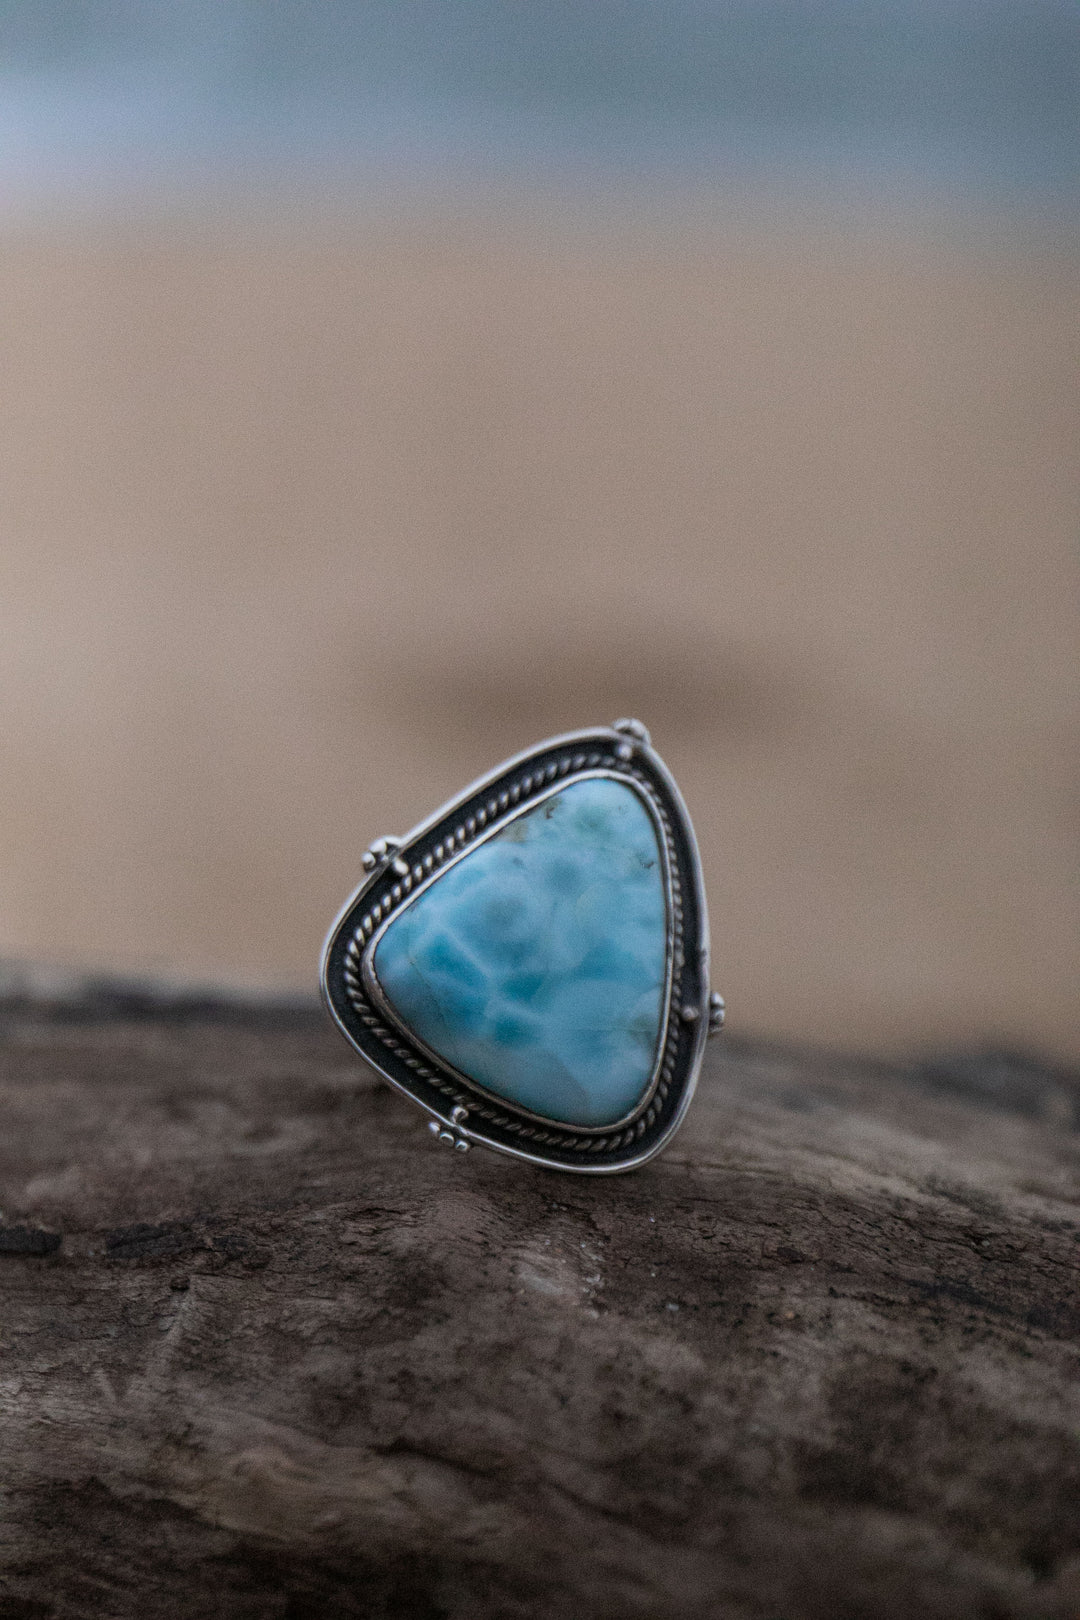 Larimar Ring in Tribal Sterling Silver Setting - Size 7.5 US